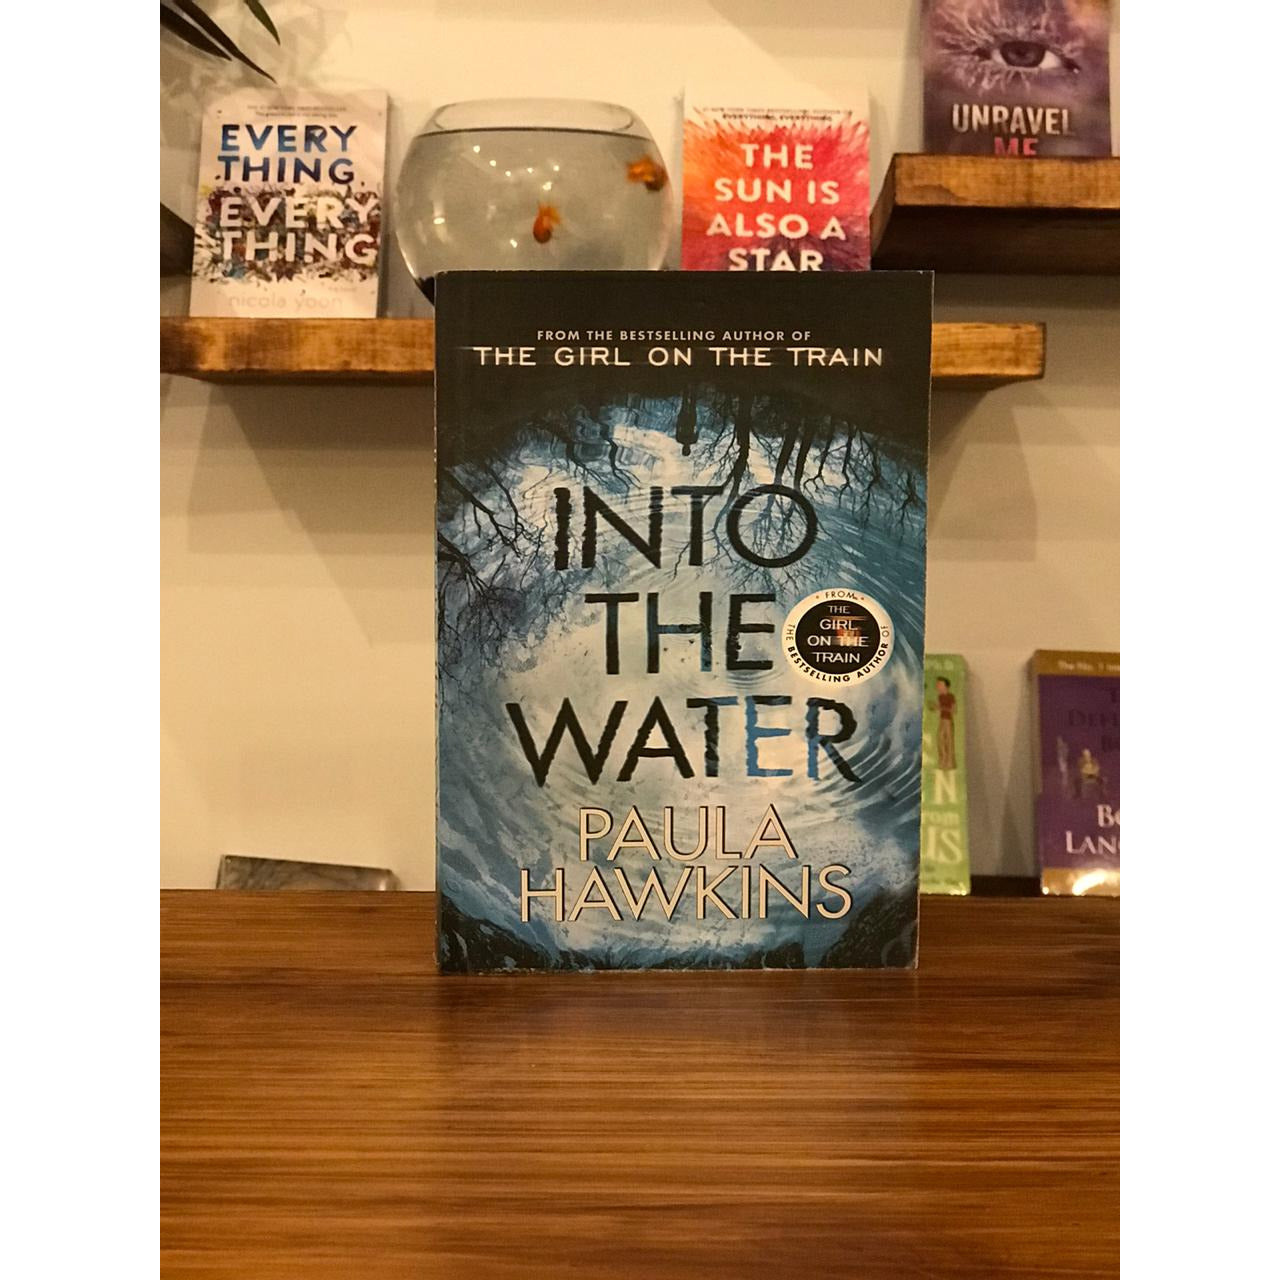 Into the Water by Paula Hawkins